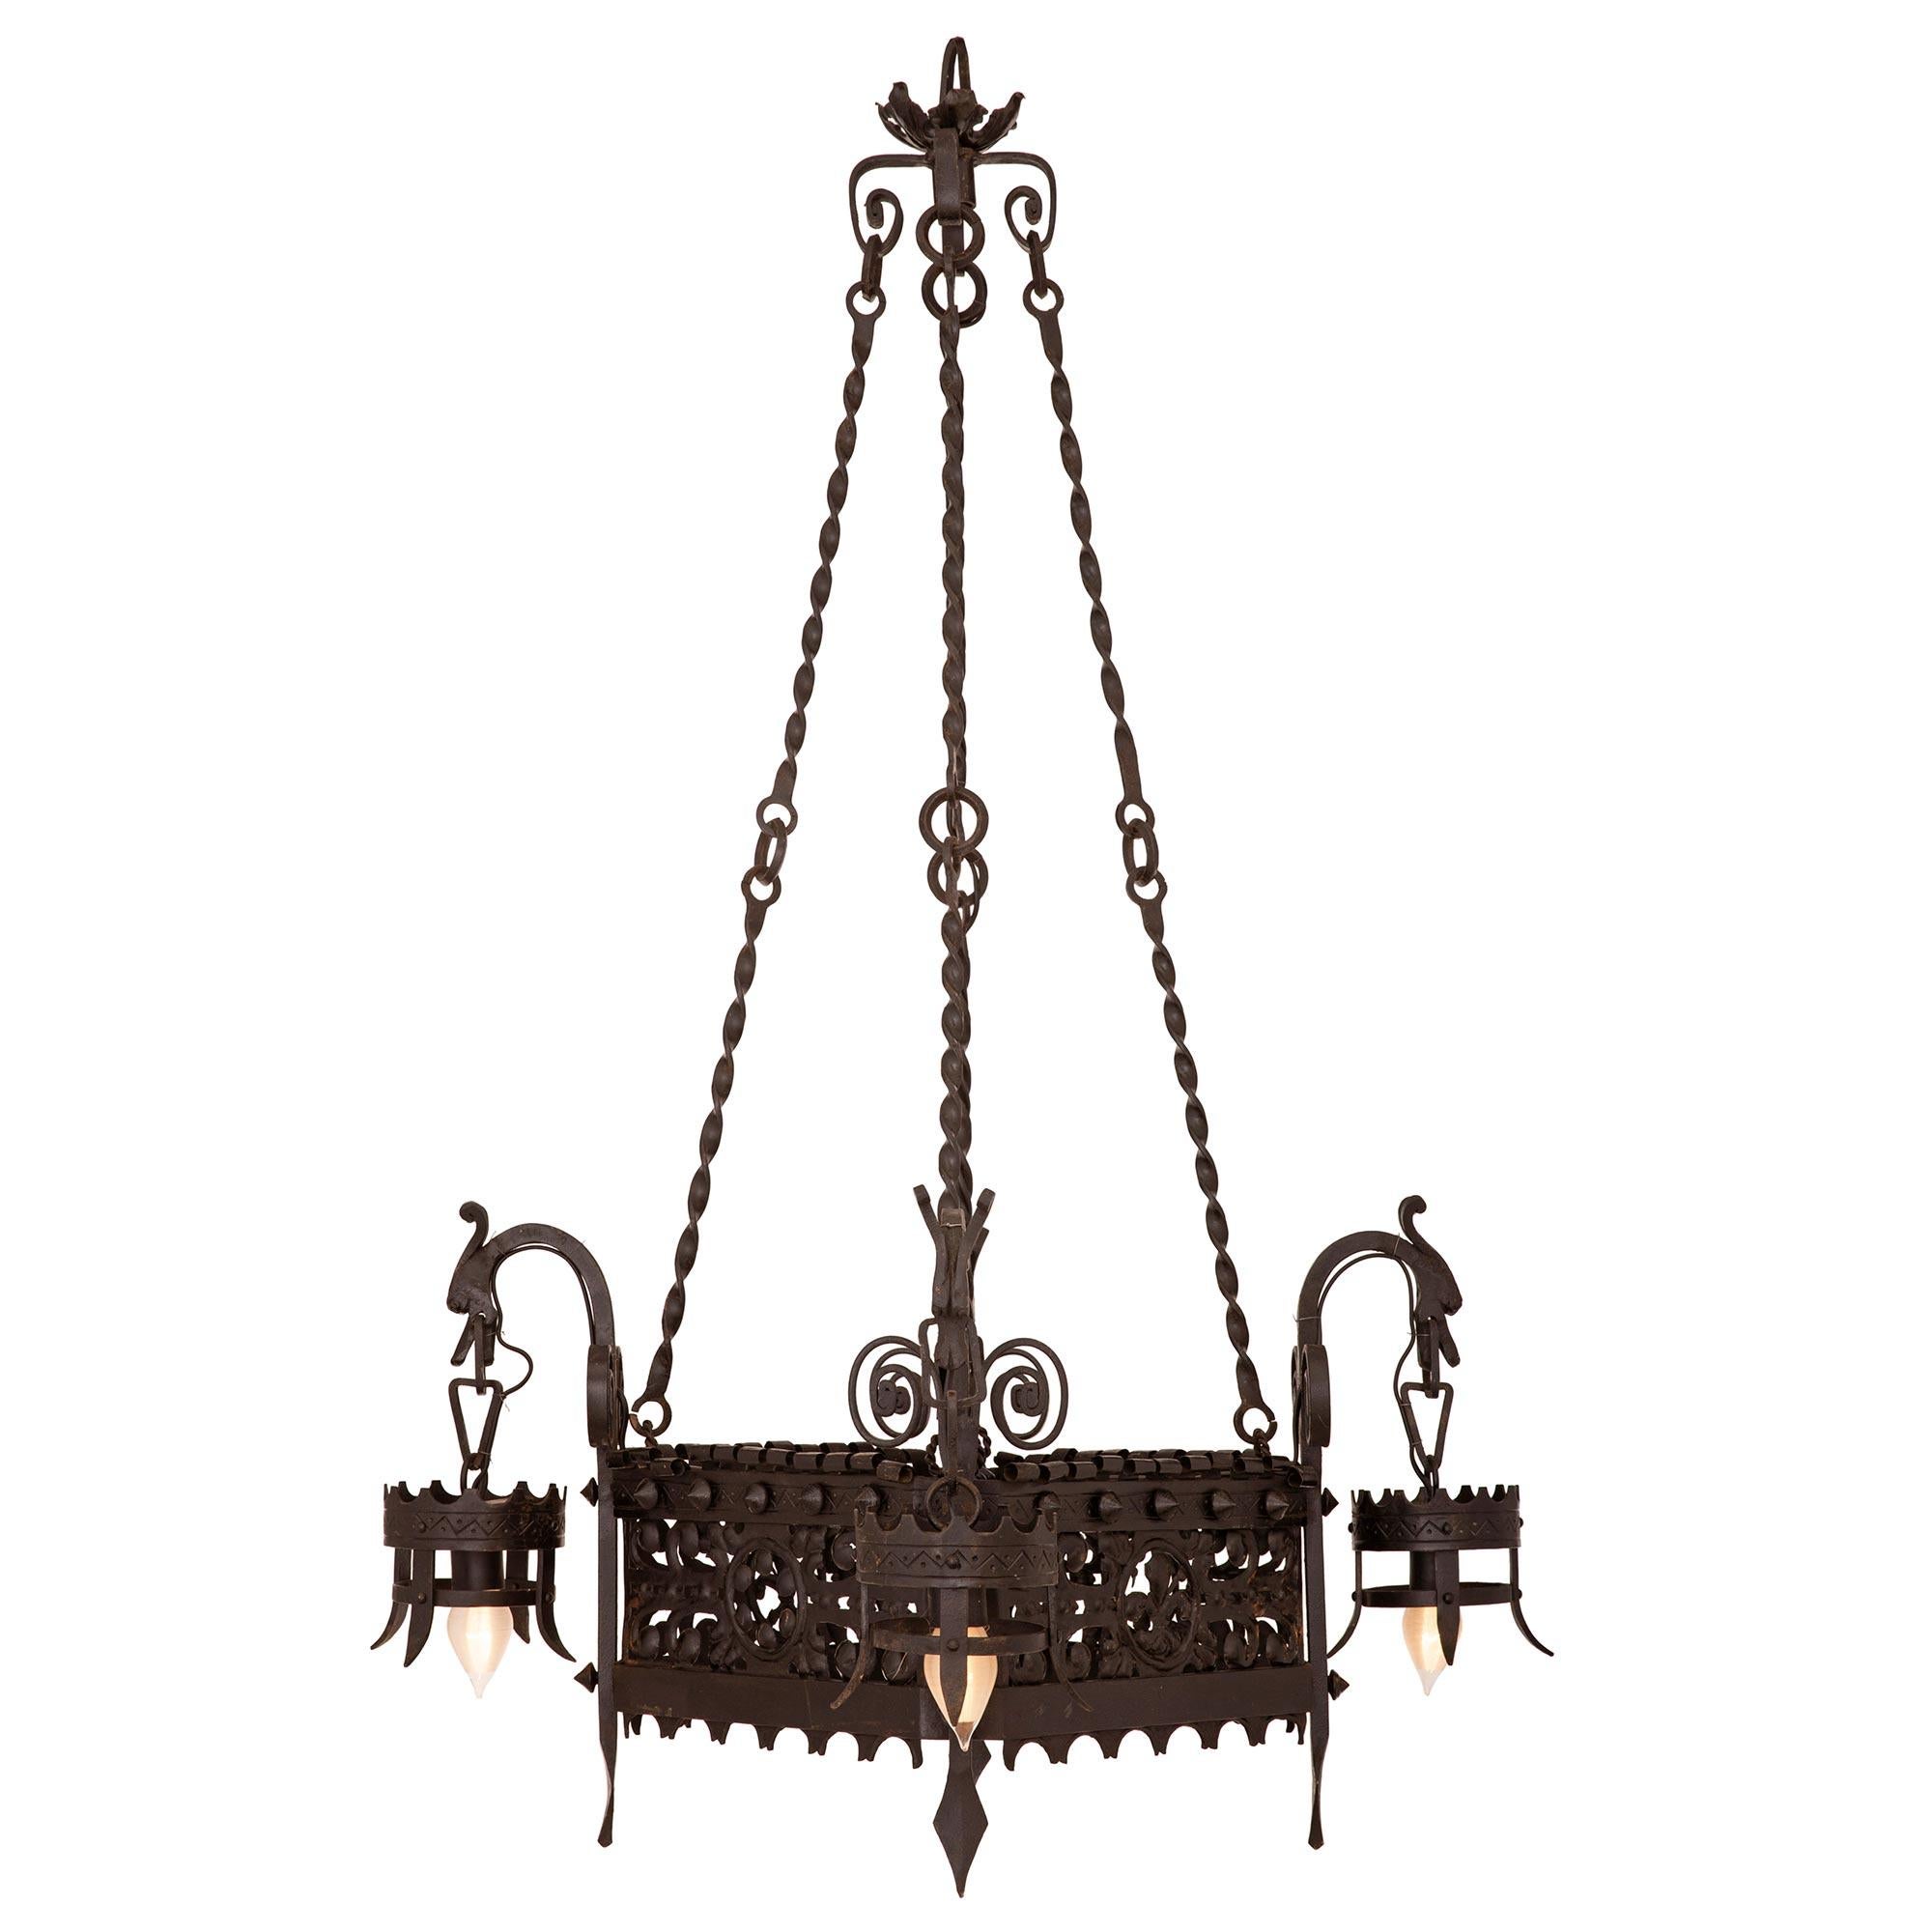 A beautiful French 19th century Renaissance st. wrought iron chandelier. The four arm five light chandelier displays a single hanging light bulb centered by beautiful scrolled pierced wrought iron designs with four striking circular torch like